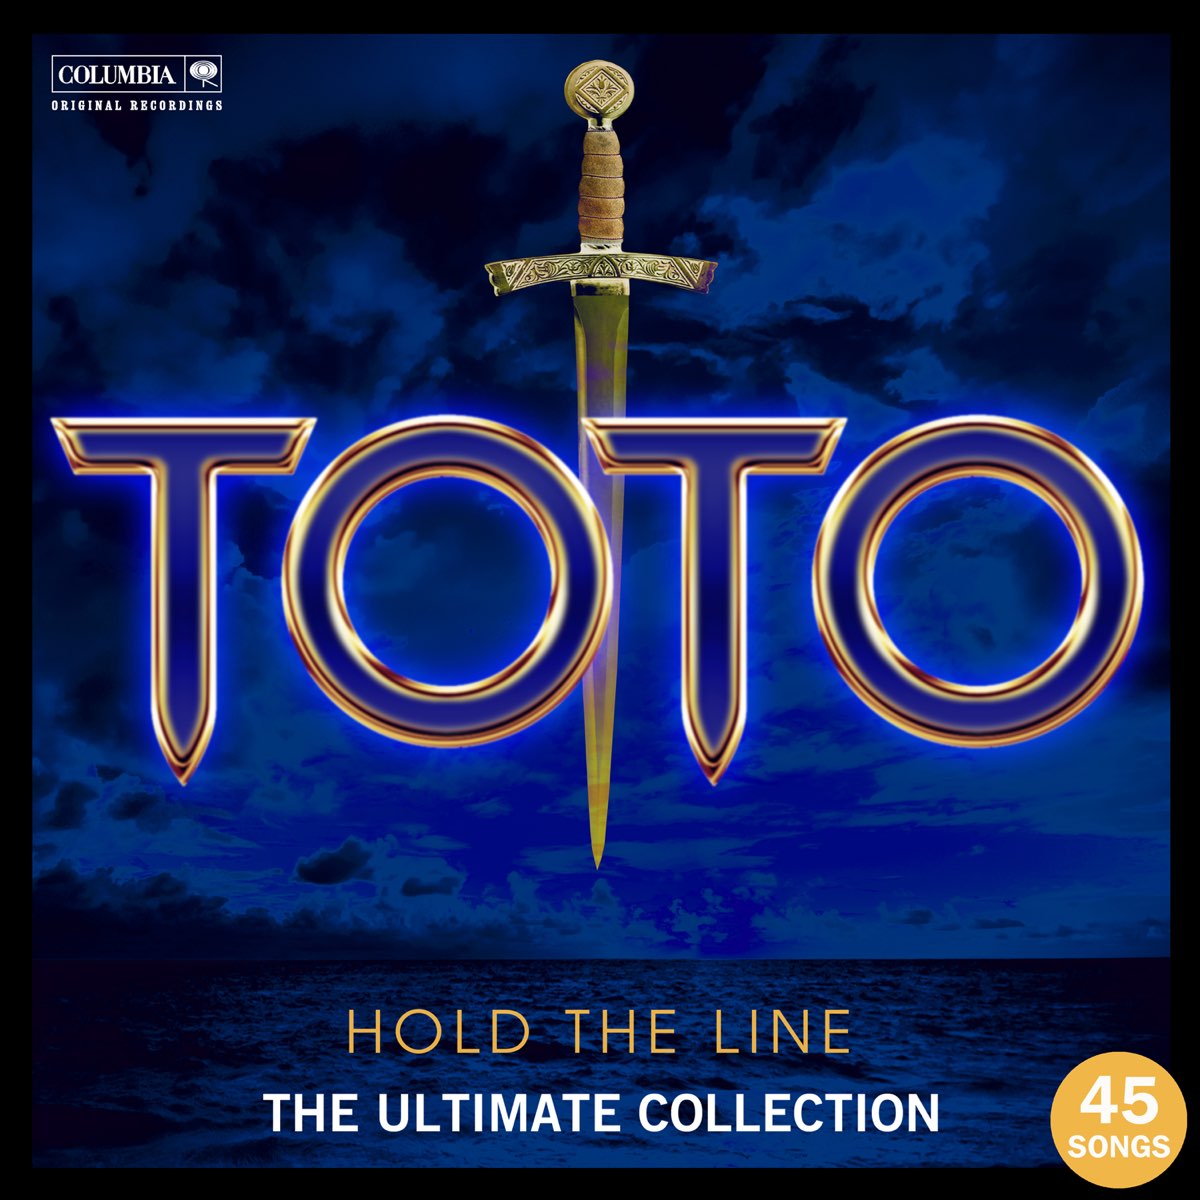 Hold the Line: The Ultimate Toto Collection by Toto on Apple Music